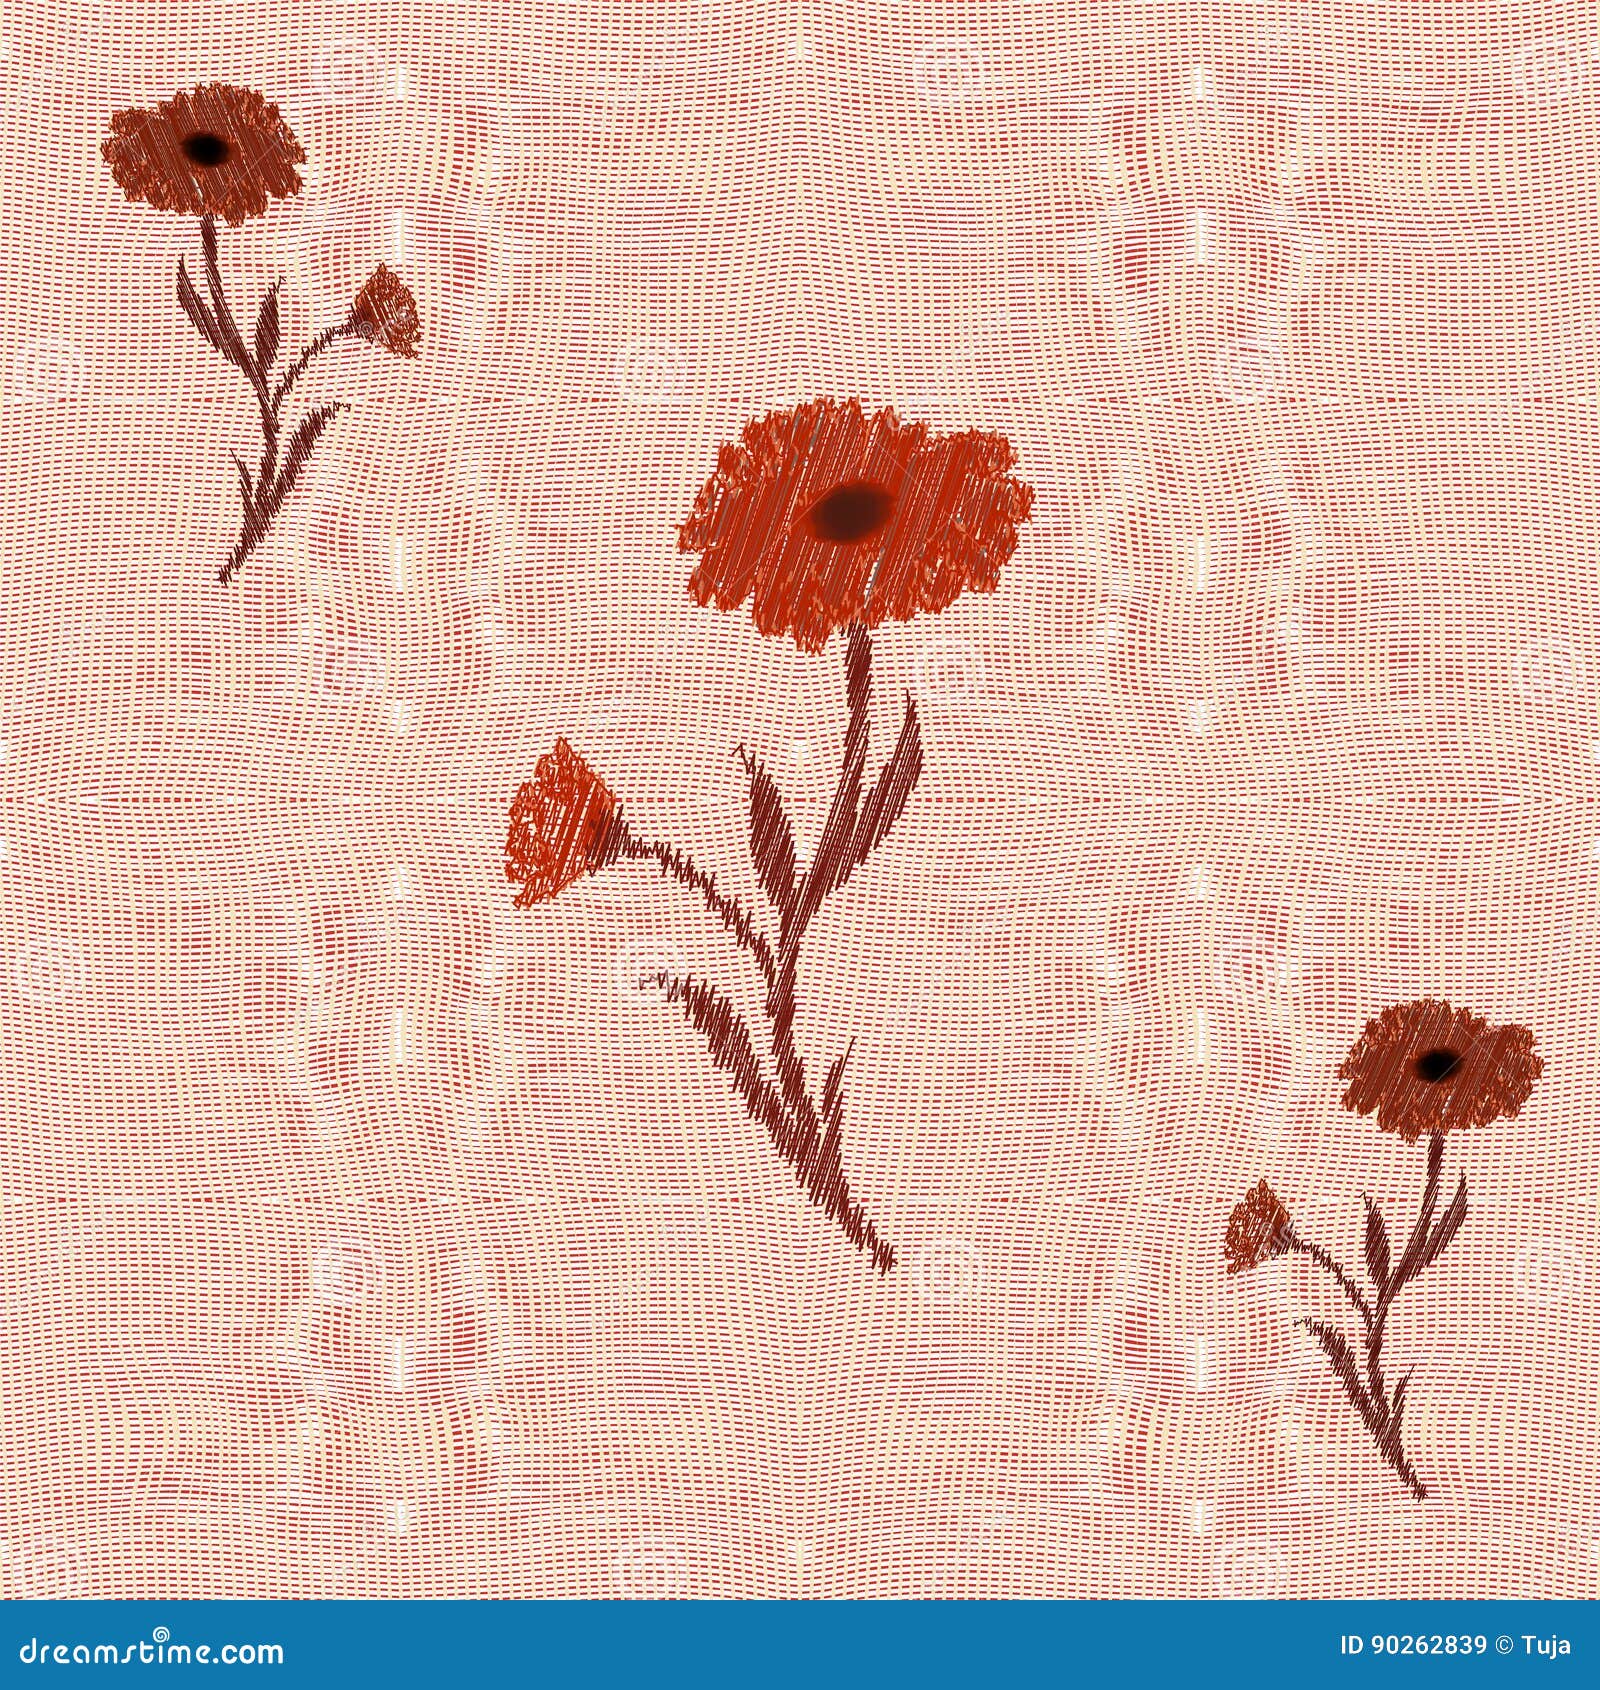 weave interlace seamless pattern with floral applique